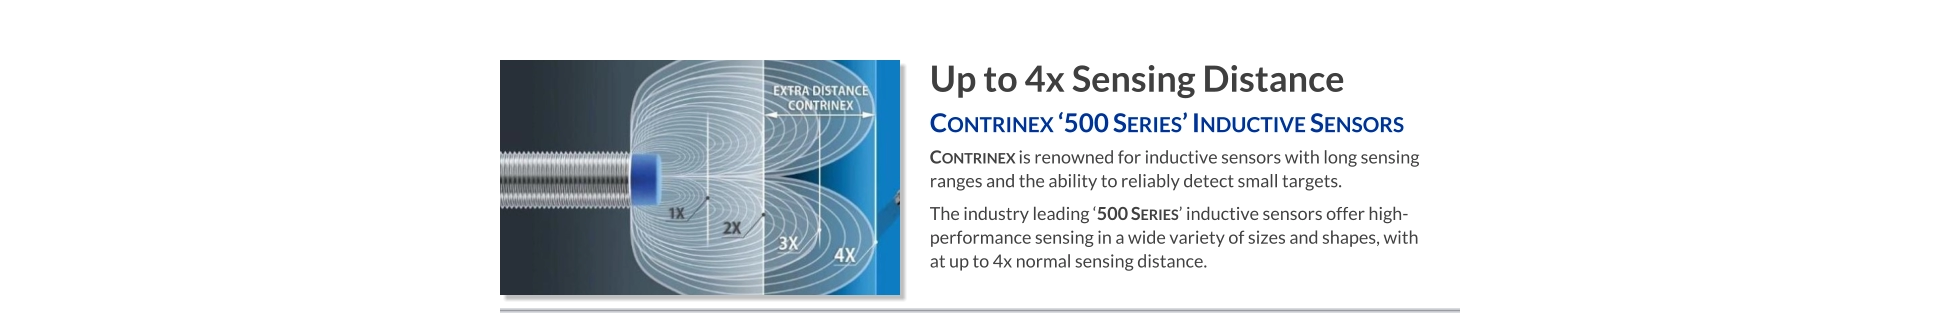 Up to 4x Sensing Distance Contrinex ‘500 Series’ Inductive Sensors   Contrinex is renowned for inductive sensors with long sensing ranges and the ability to reliably detect small targets.  The industry leading ‘500 Series’ inductive sensors offer high-performance sensing in a wide variety of sizes and shapes, with at up to 4x normal sensing distance.